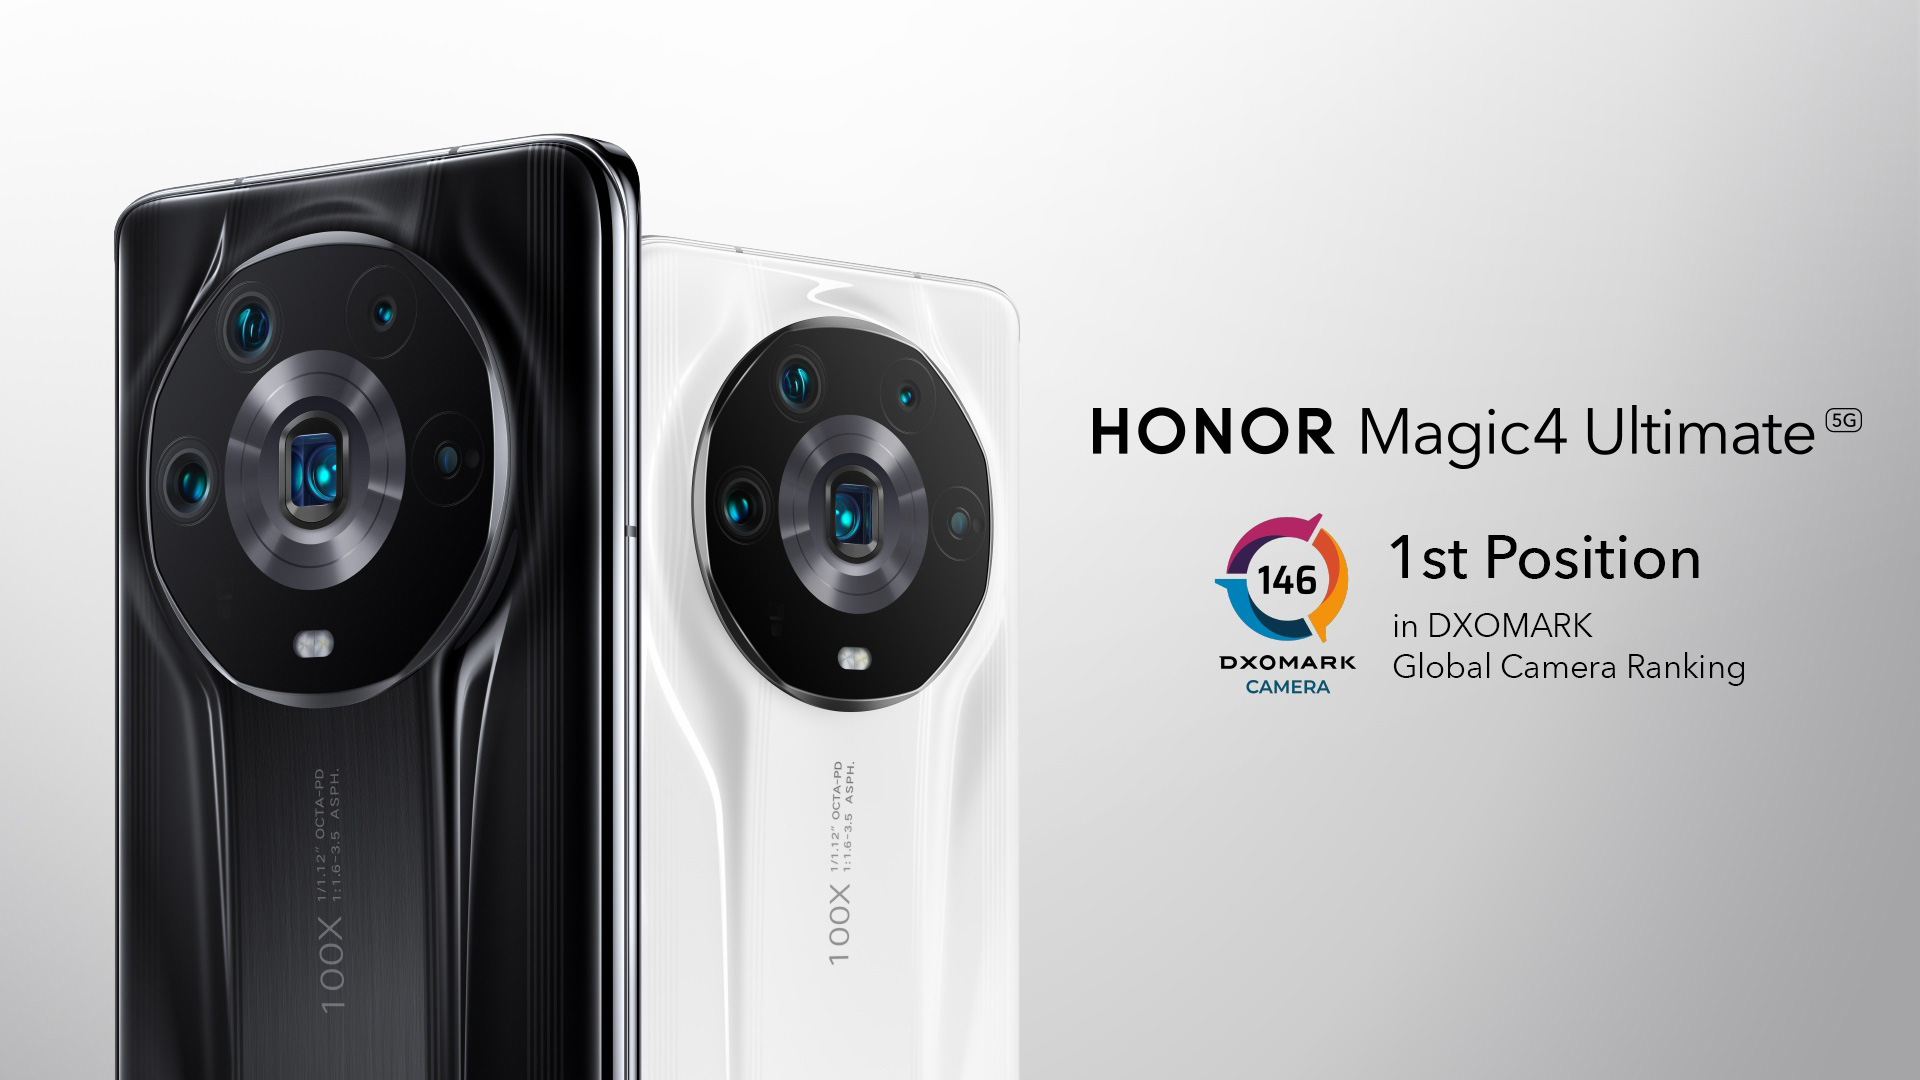 Honor Magic4 Ultimate with all-new professional-grade video format